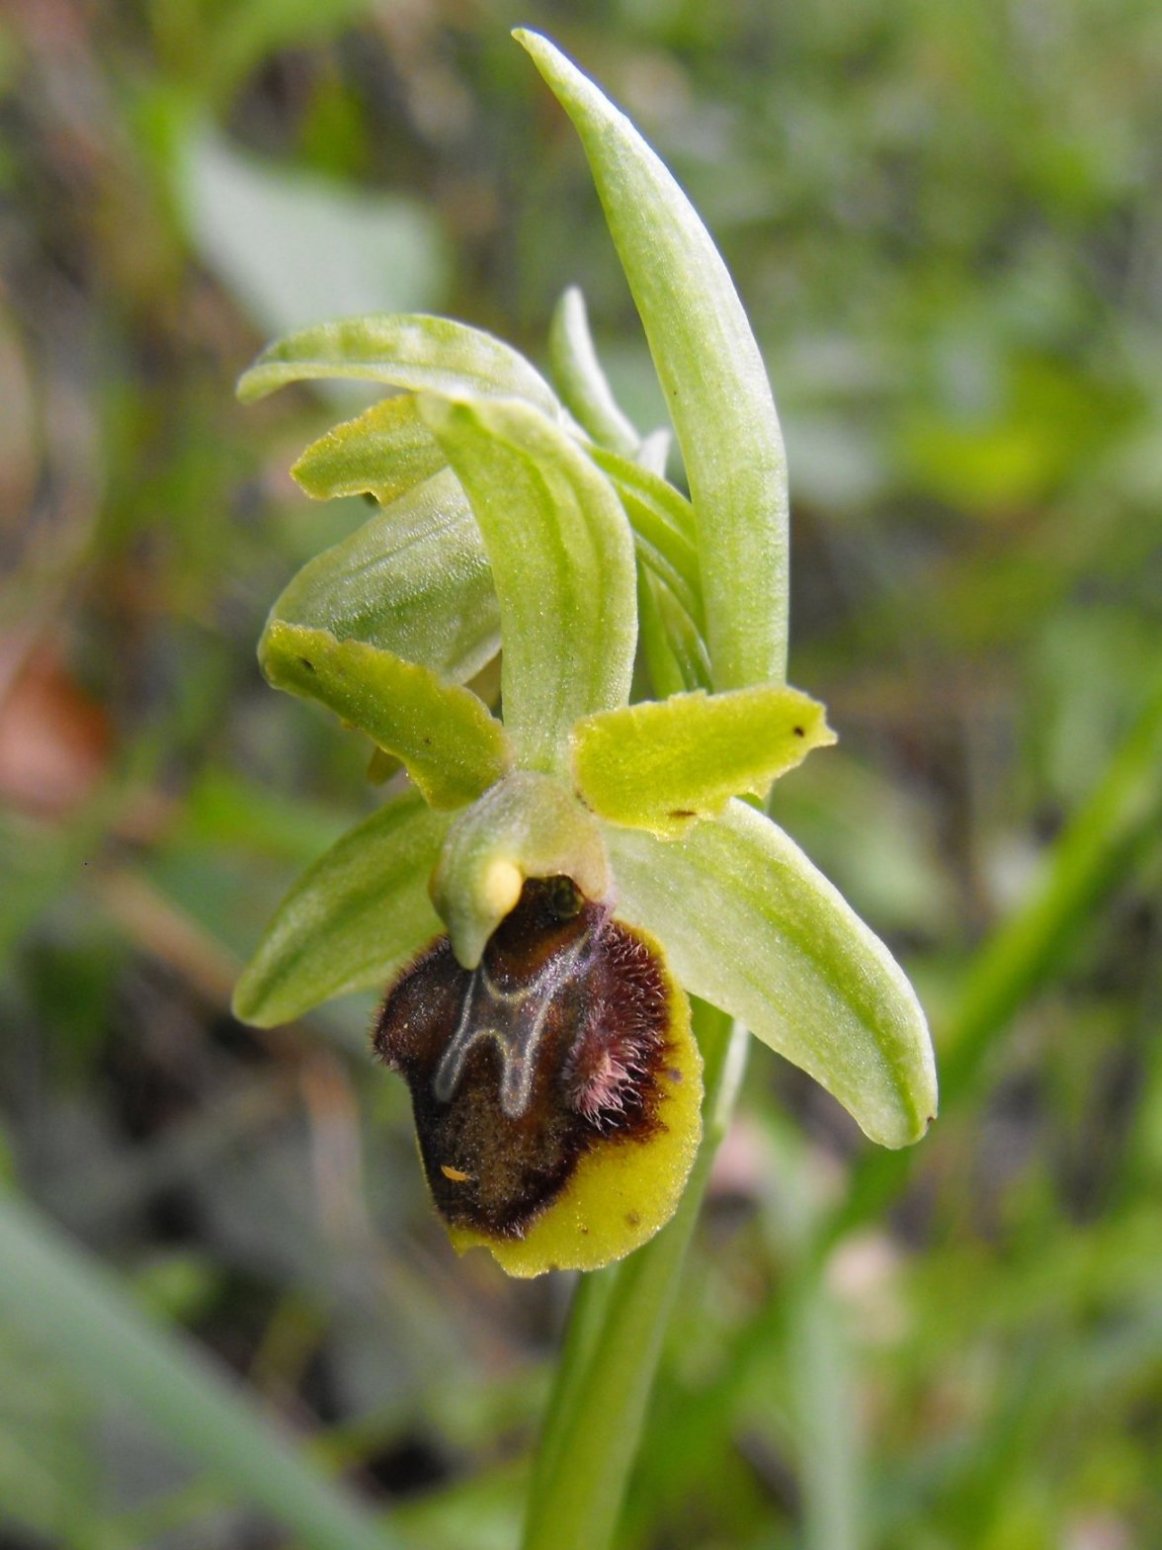 Ophrys quale?